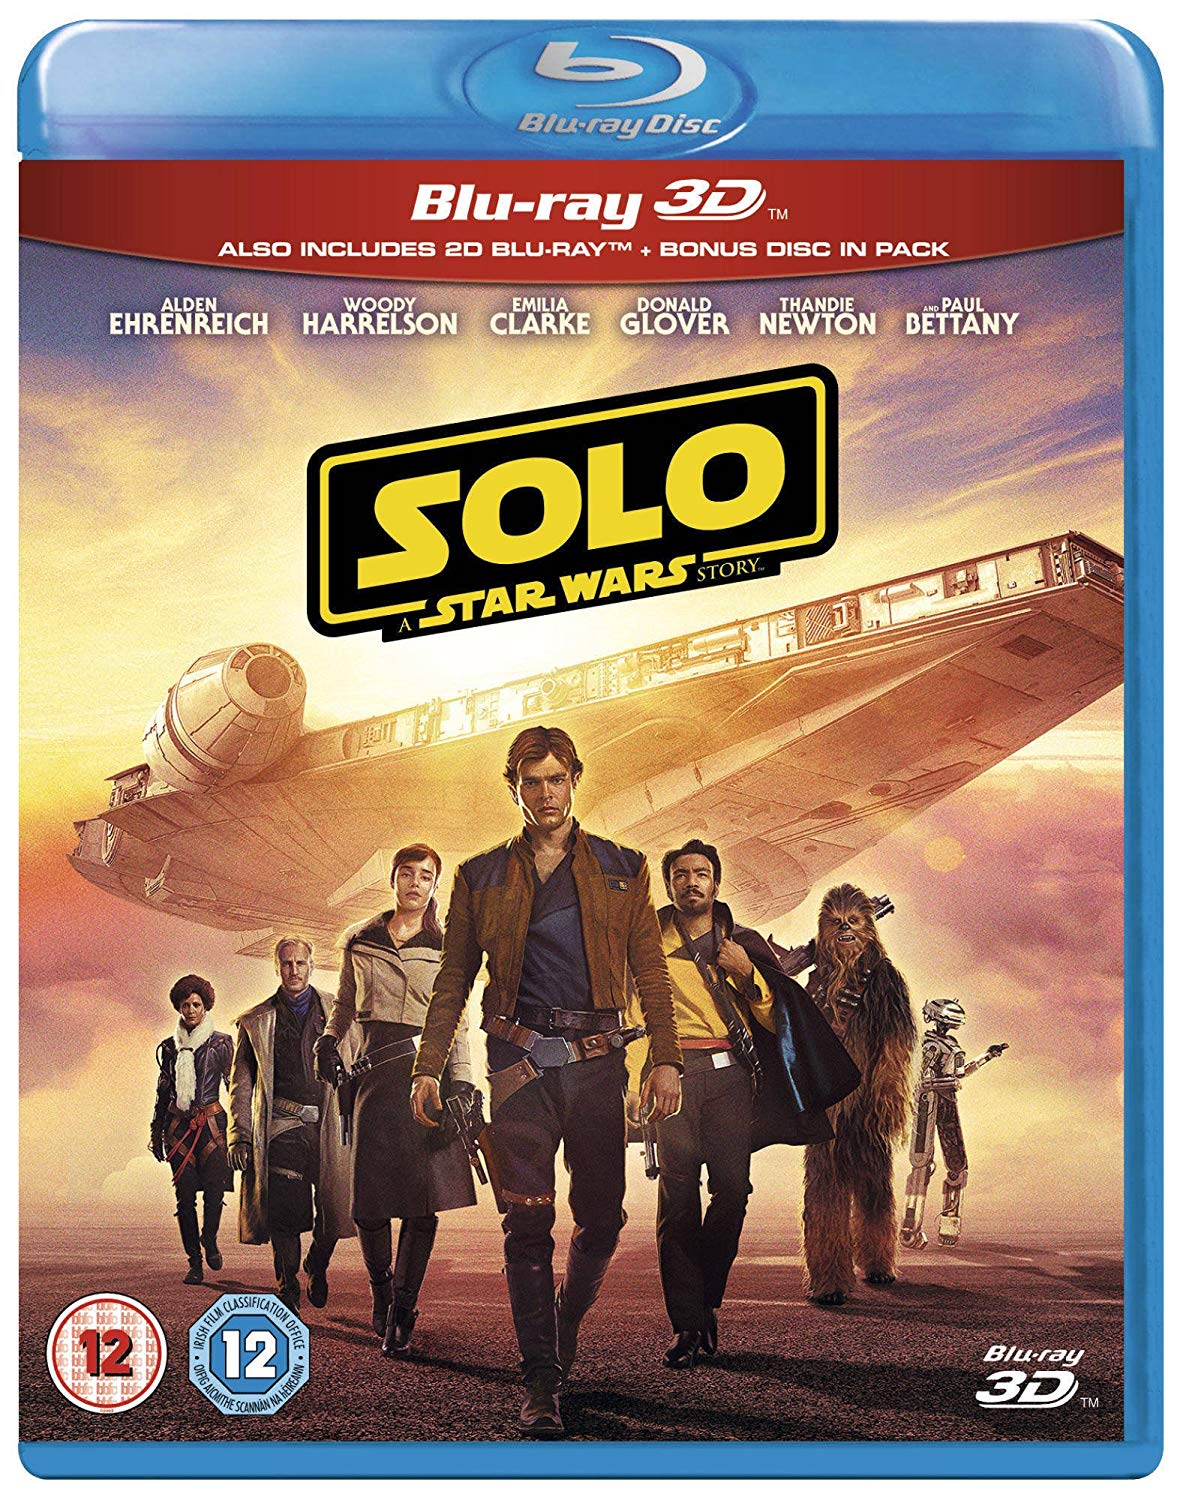 'SOLO - A STAR WARS STORY' COMES TO UK BLU-RAY AND DVD